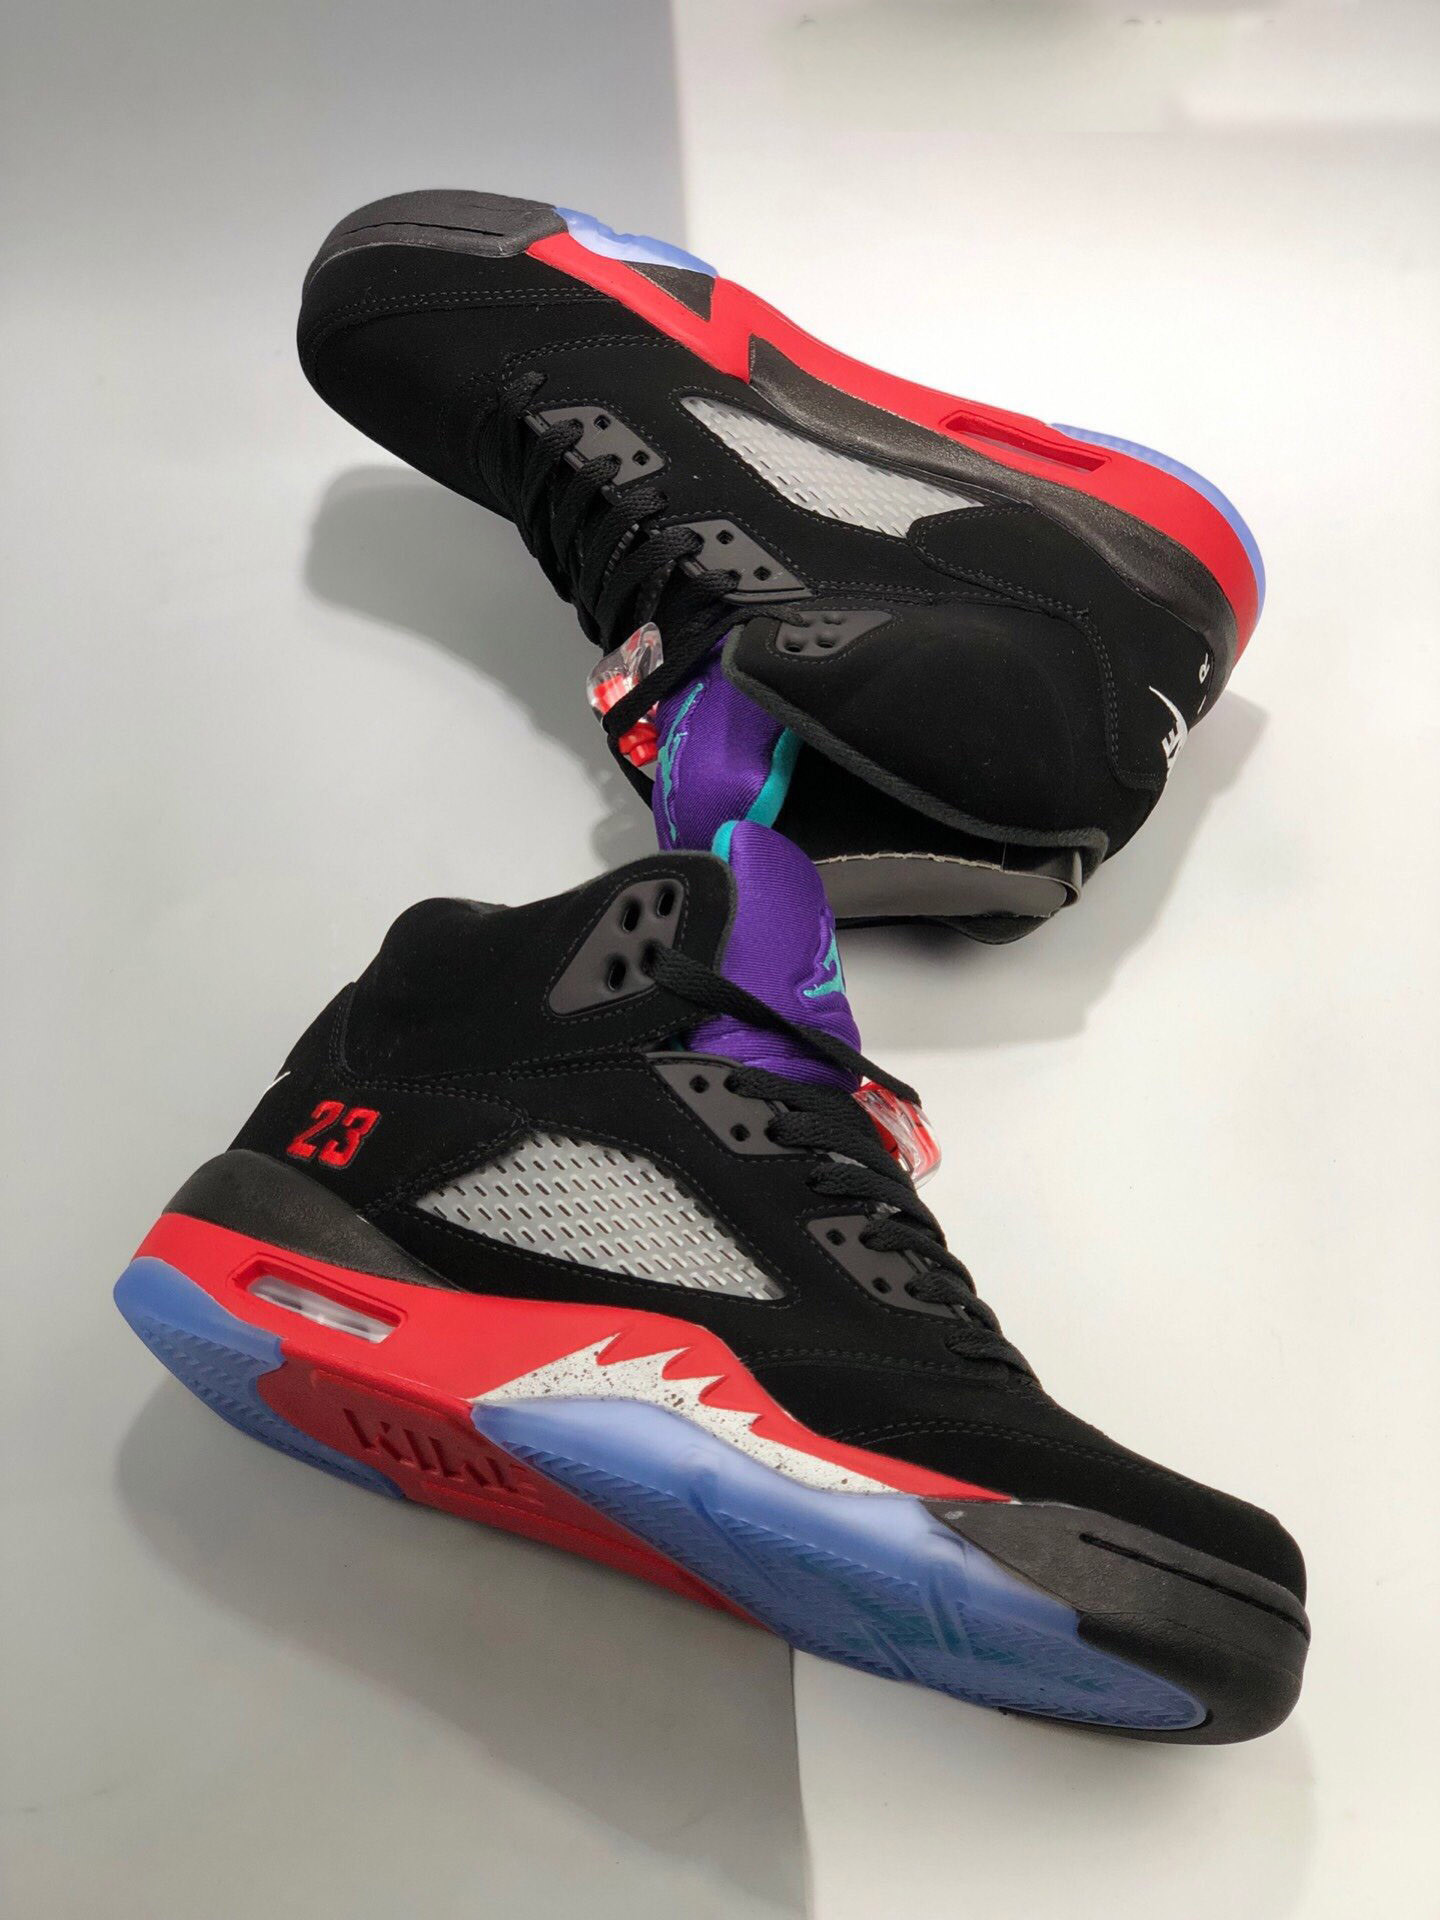 Air Jordan 5 Top 3 Black Fire Red-Grape Ice-New Emerald For Sale